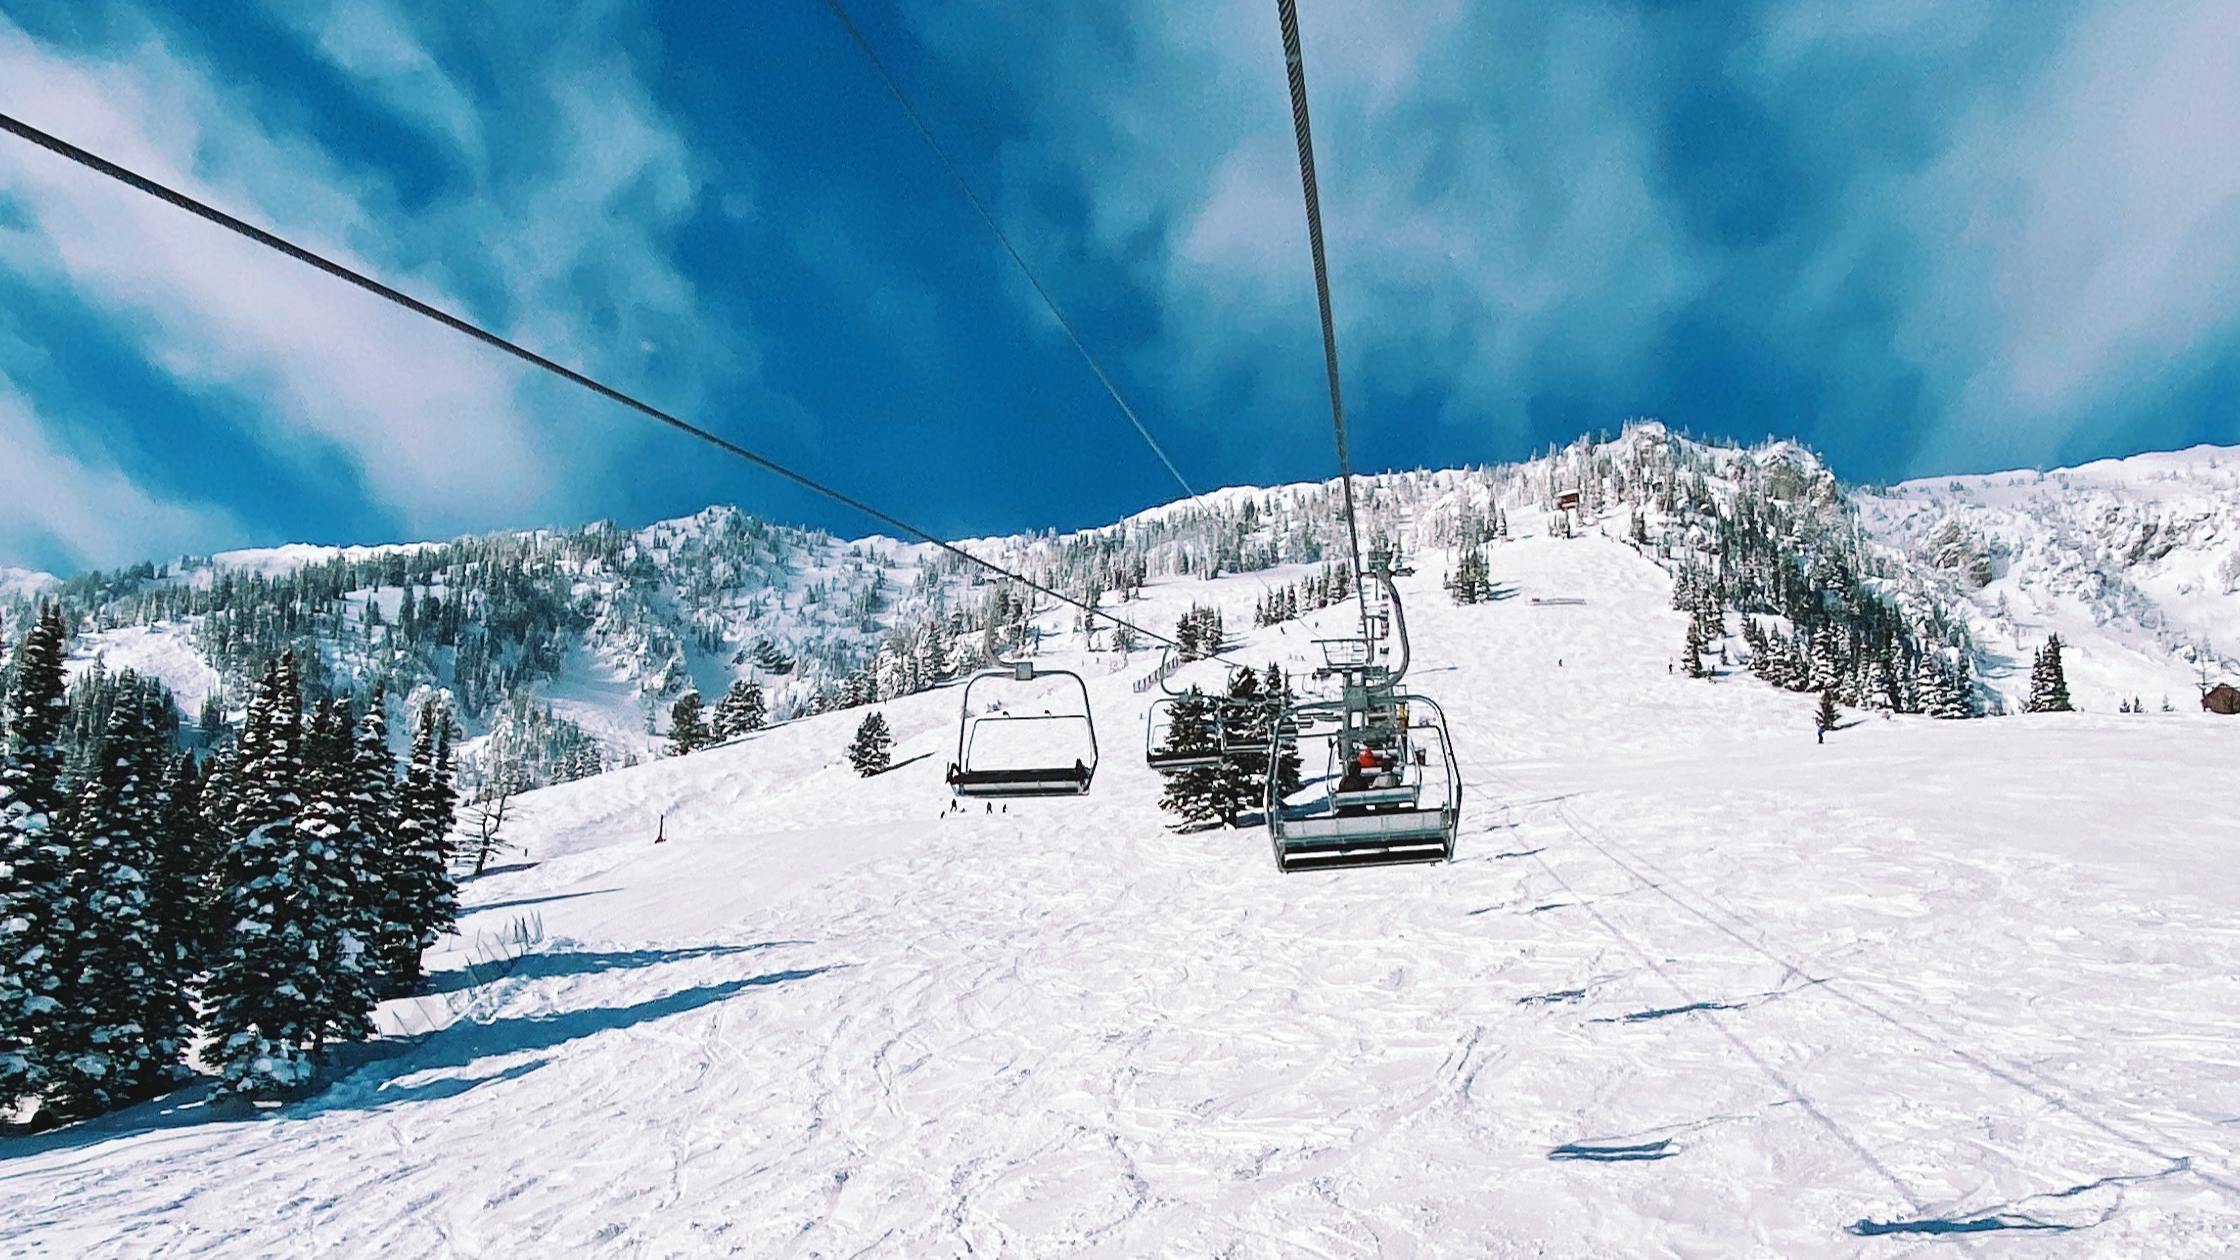 View of the chairlift and snowy slope below from one of the chairs